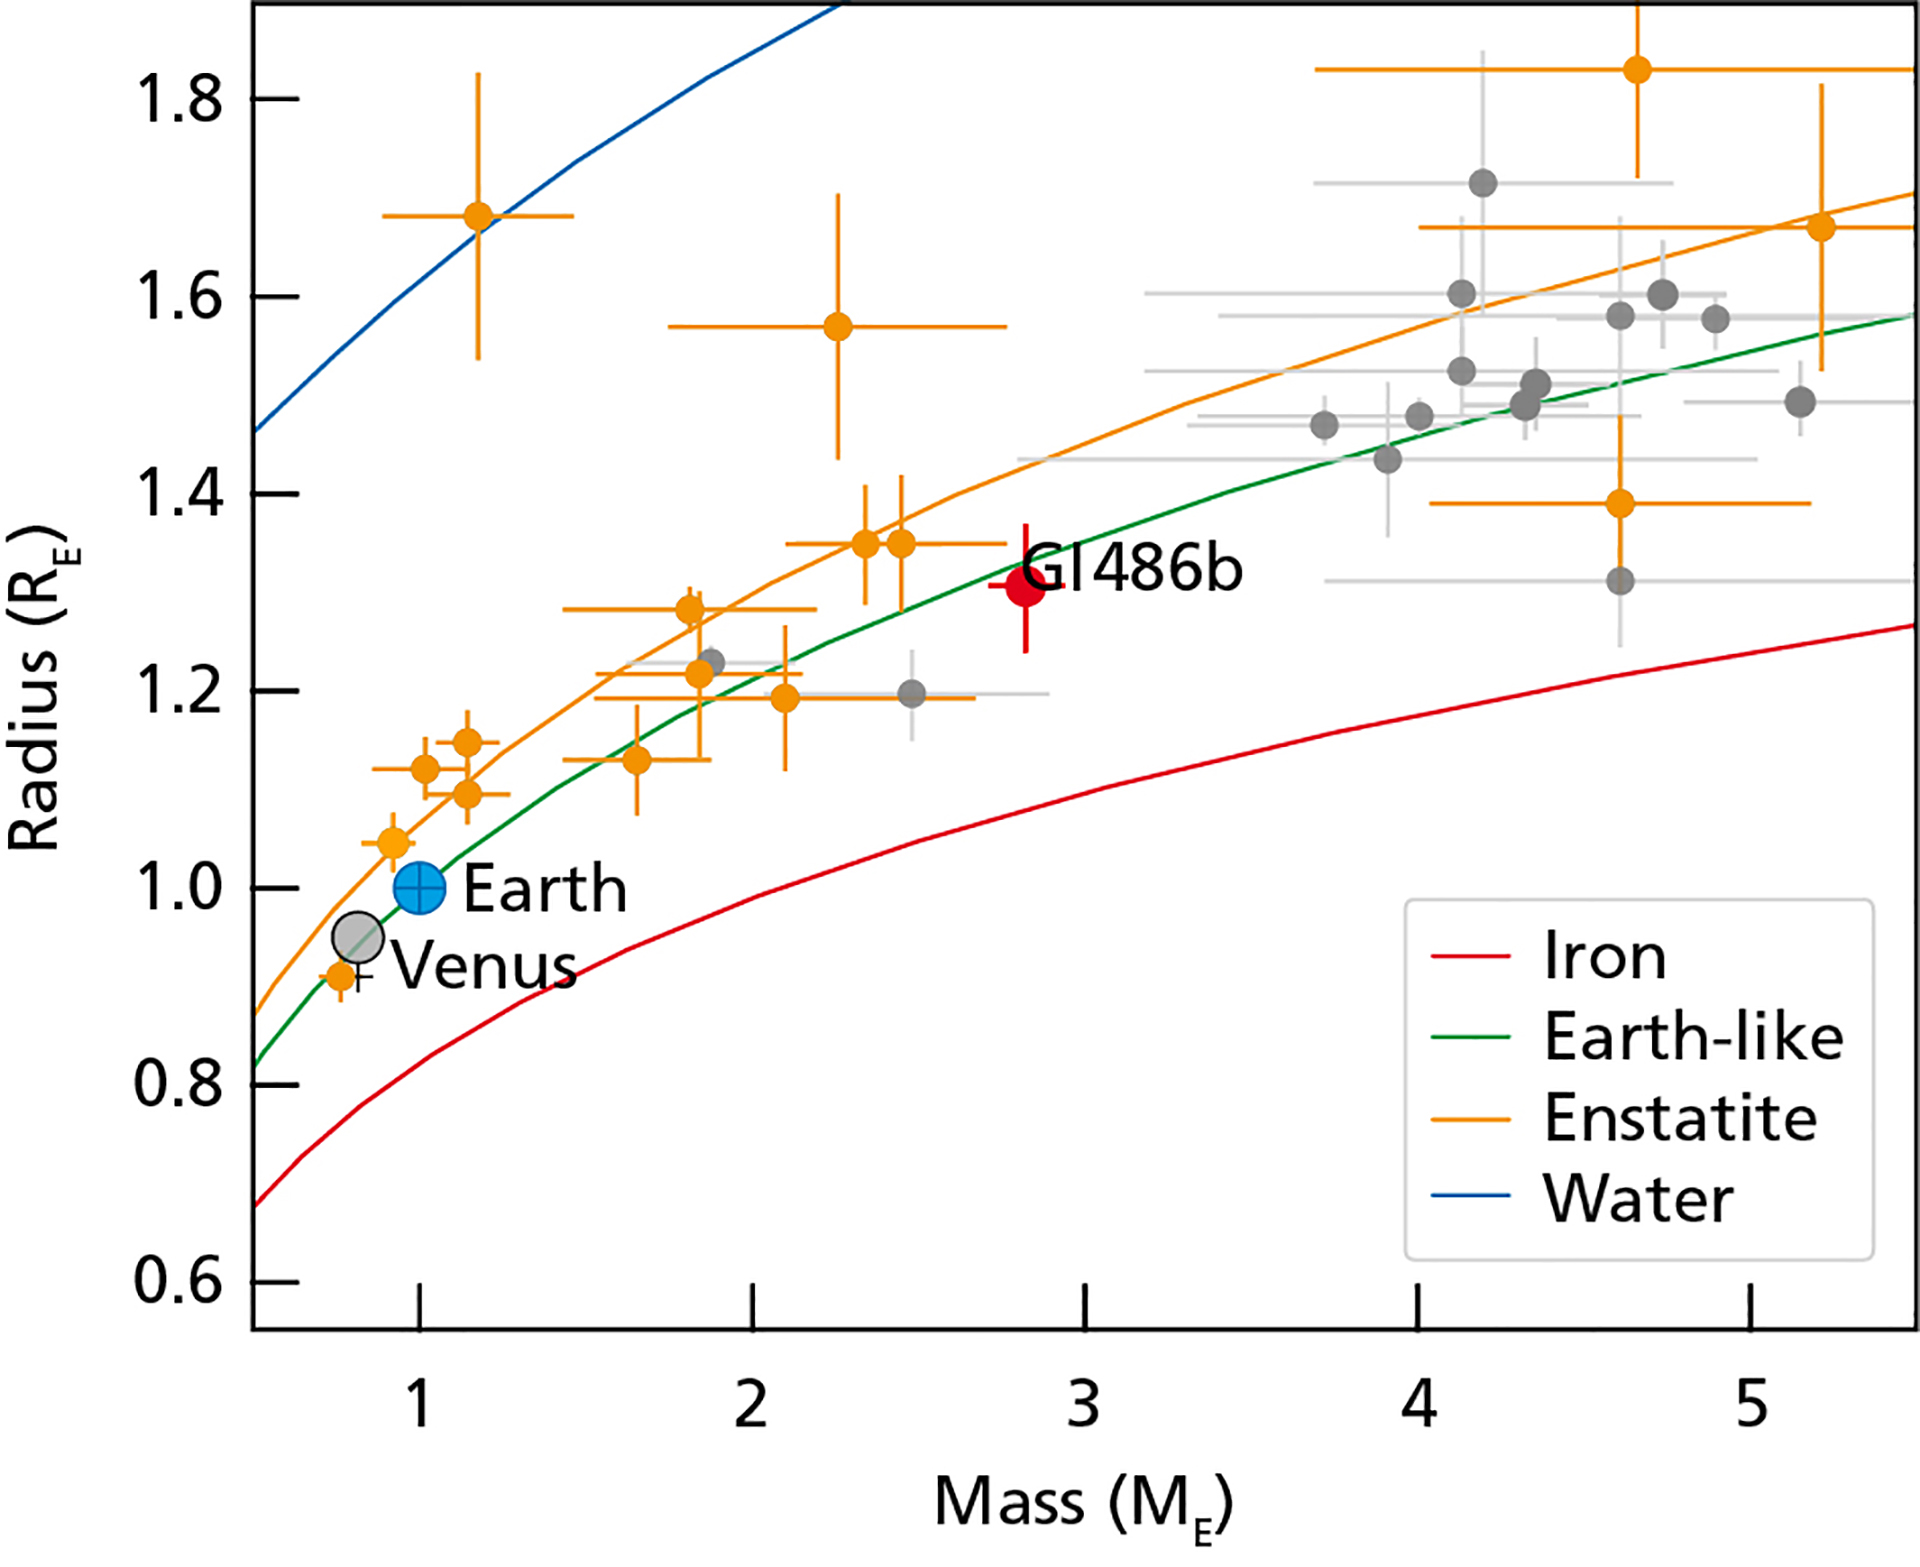 The diagram provides an estimate of the interior compositions of selected exoplanets based on their masses and radii in Earth units. The red dot represents Gliese 486b, and the orange symbols represent planets around cool stars like Gliese 486. The gray dots show planets housed by hotter stars. The color curves indicate the theoretical mass radius relationships for pure water at 700 K (blue), for the mineral enstatite (orange), for Earth (green), and pure iron (red). By comparison, the diagram also highlights Venus and Earth. Credit: Trifonov et al./ MPIA Graphics Department.